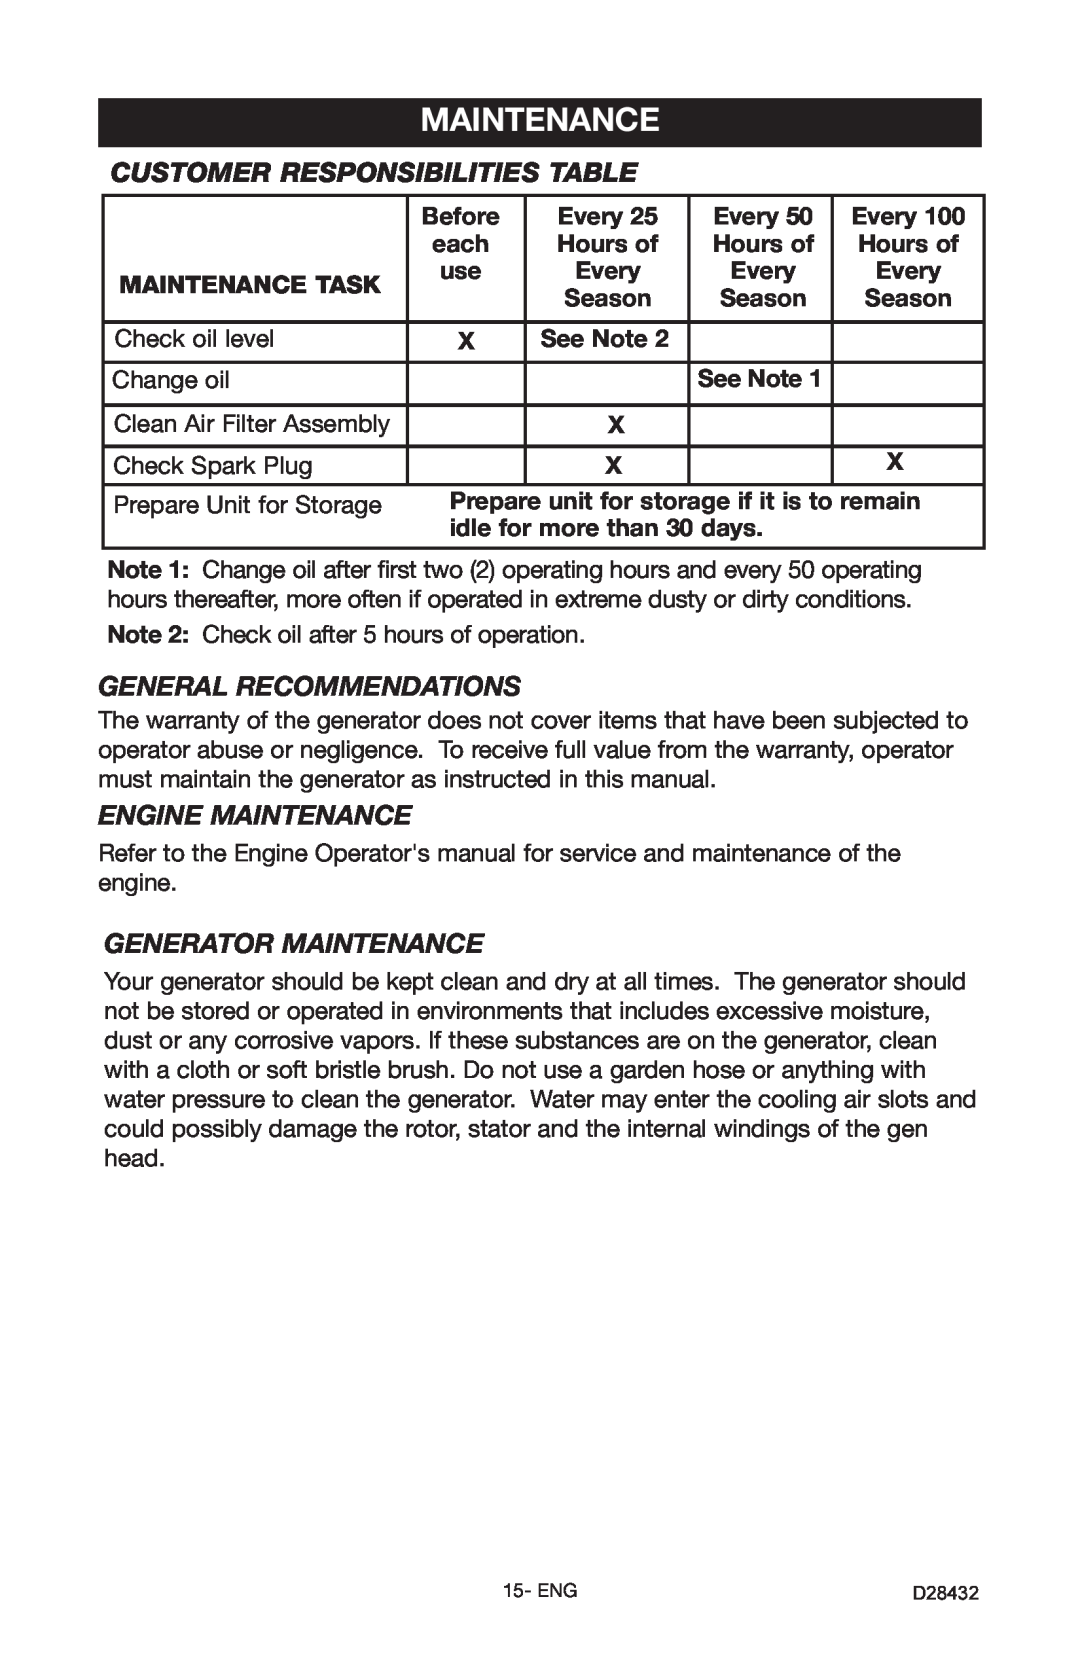 Porter-Cable CH350IS instruction manual Customer Responsibilities Table, General Recommendations, Engine Maintenance 